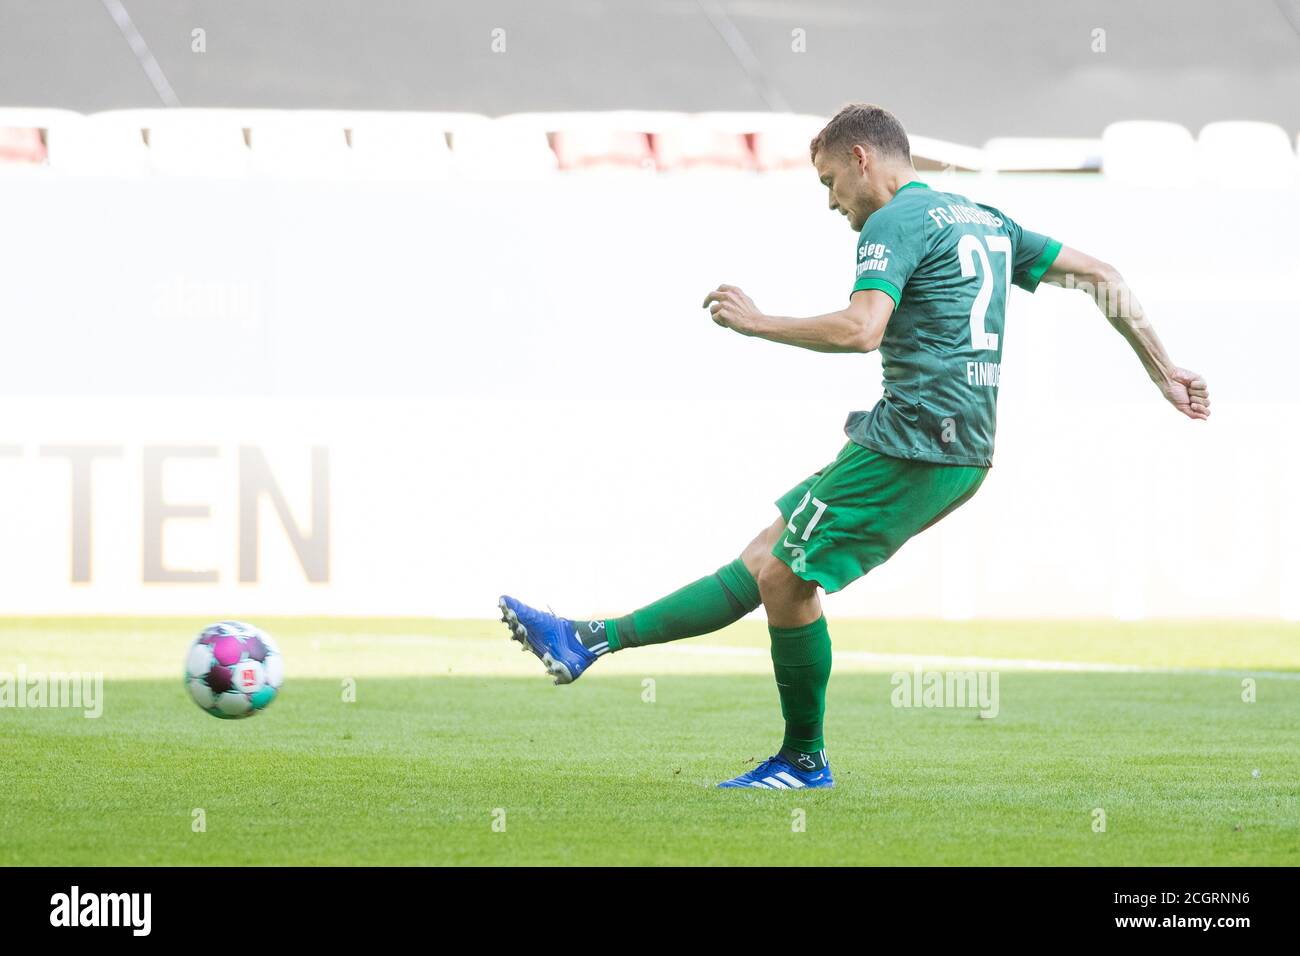 12 September 2020, Bavaria, Augsburg: Football: DFB Cup, Eintracht Celle - FC Augsburg, 1st round, WWK Arena. Augsburg's Alfred Finnbogason scores the goal for 0:3. Photo: Tom Weller/dpa - IMPORTANT NOTE: In accordance with the regulations of the DFL Deutsche Fußball Liga and the DFB Deutscher Fußball-Bund, it is prohibited to exploit or have exploited in the stadium and/or from the game taken photographs in the form of sequence images and/or video-like photo series. Stock Photo